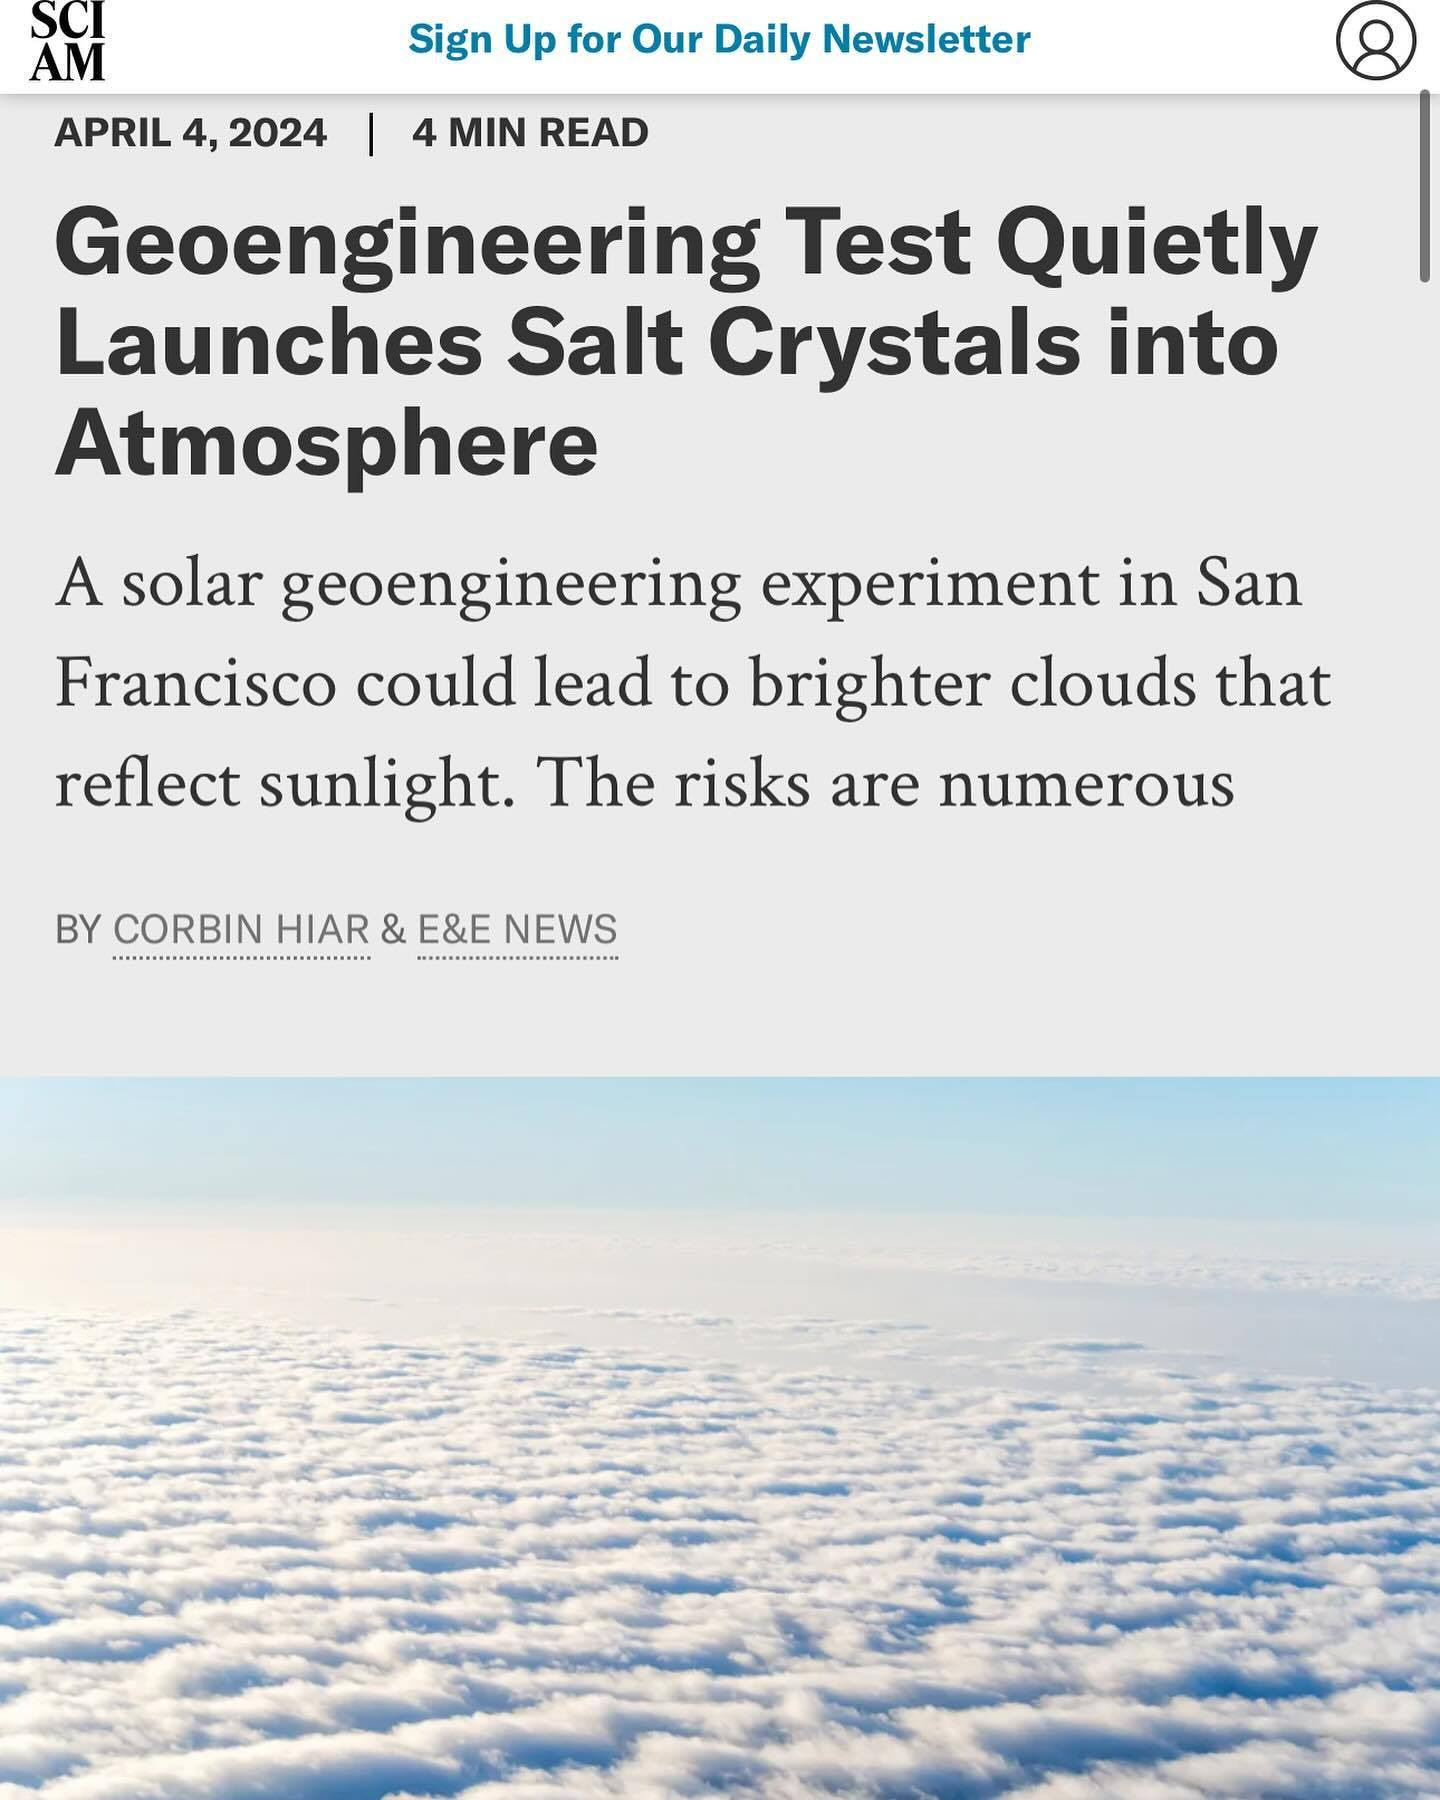 May be an image of cloud and text that says 'SCI AM Sign Up for Our Daily Newsletter APRIL 4, 2024 4 MIN READ Geoengineering Test Quietly Launches Sat Crystals into Atmosphere A solar geoengineering experiment in San Francisco could lead to brighter clouds that reflect sunlight. The risks are numerous BY CORBIN HIAR & E&E NEWS . LAADA ..... .ANDA'